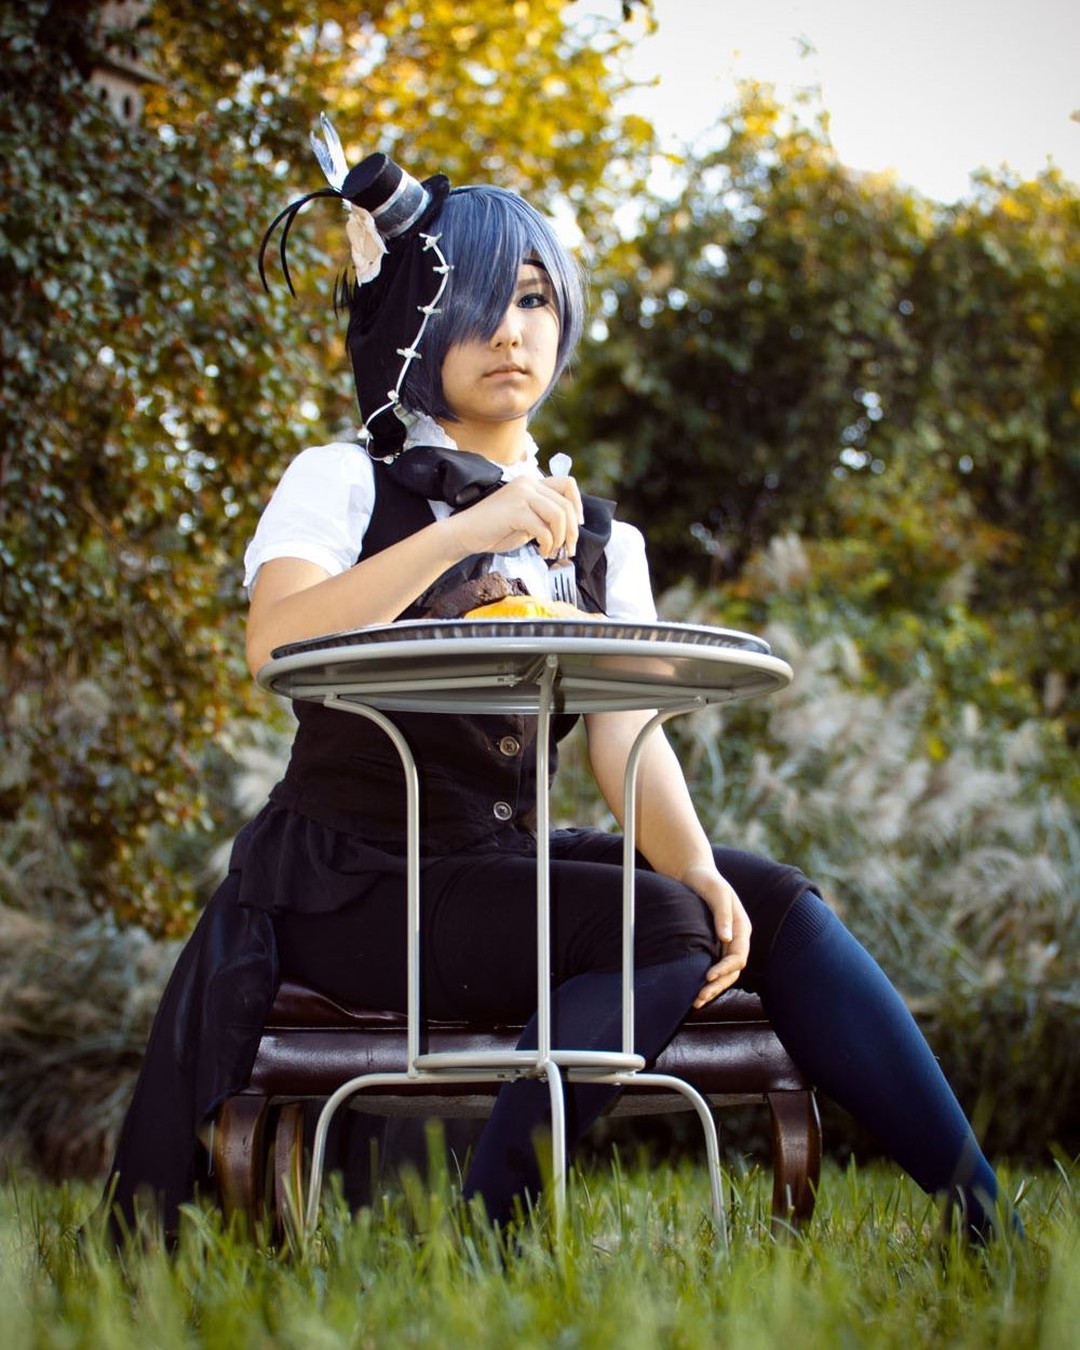 Male Costume Wig Mix Color Short Straight Cosplay Wig for Black Butler Ciel+Wig Cap+Eye Pad